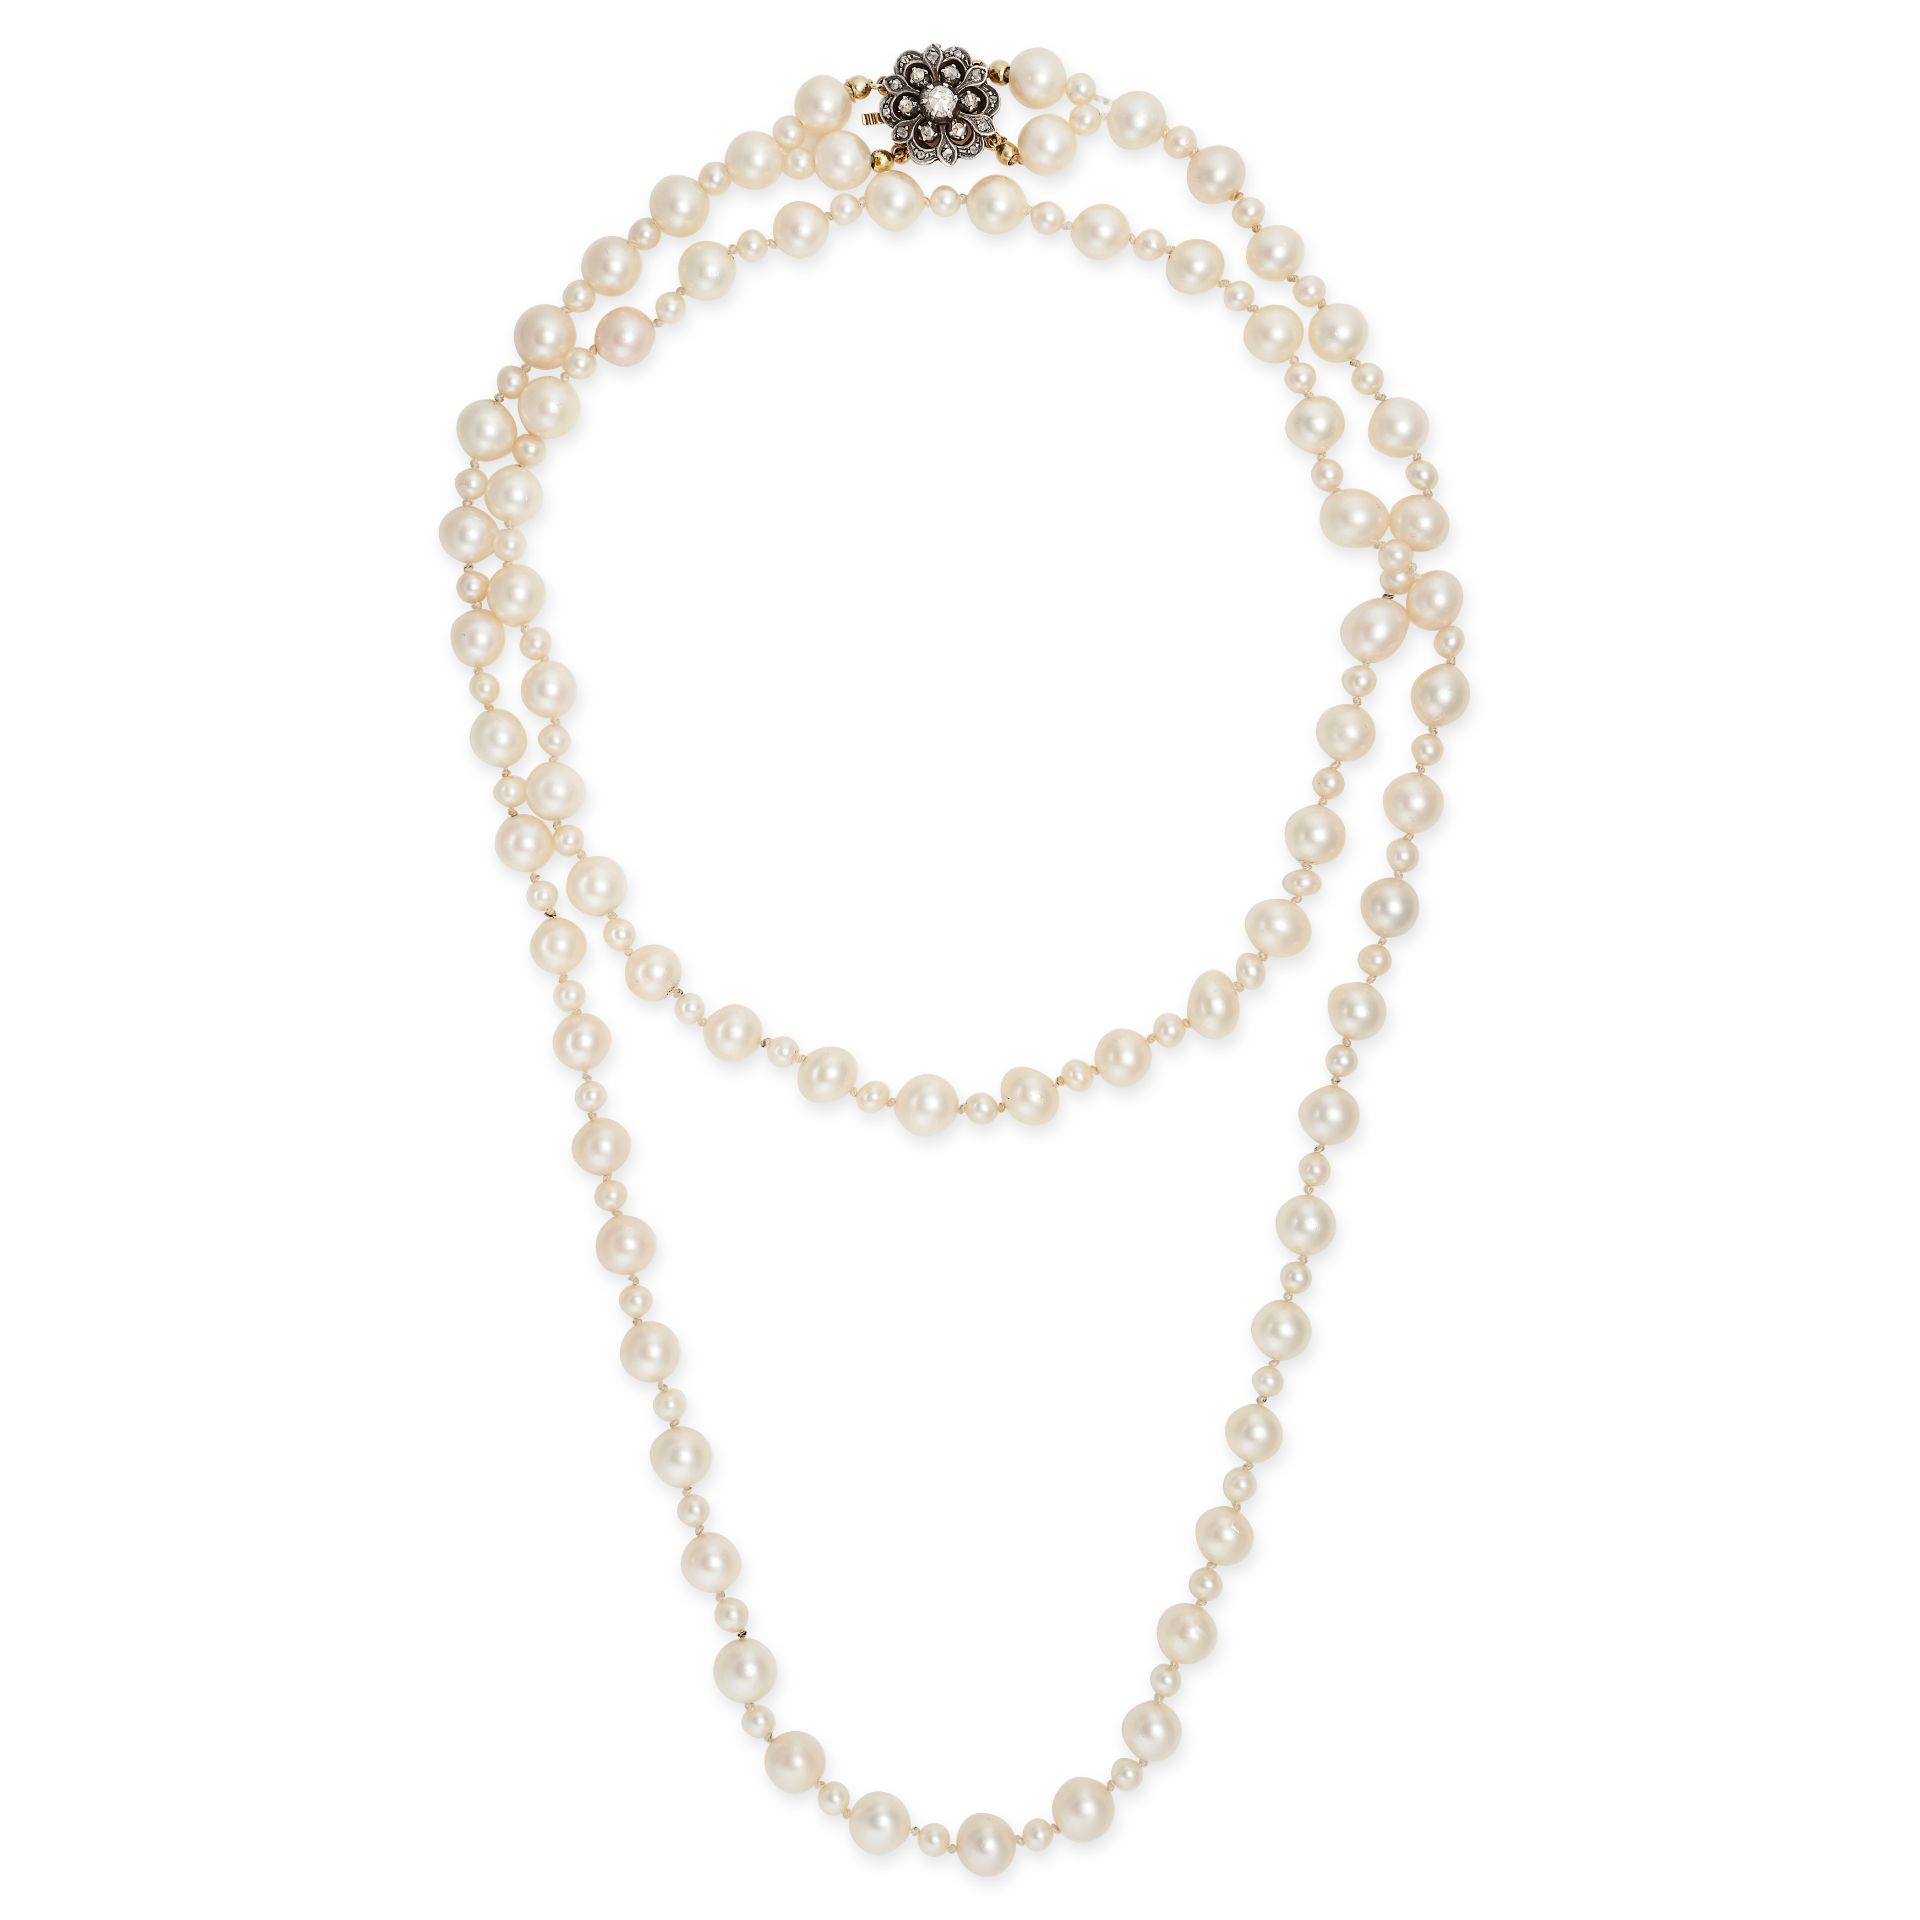 A PEARL AND DIAMOND NECKLACE in yellow gold and silver, comprising a single row of alternating la...